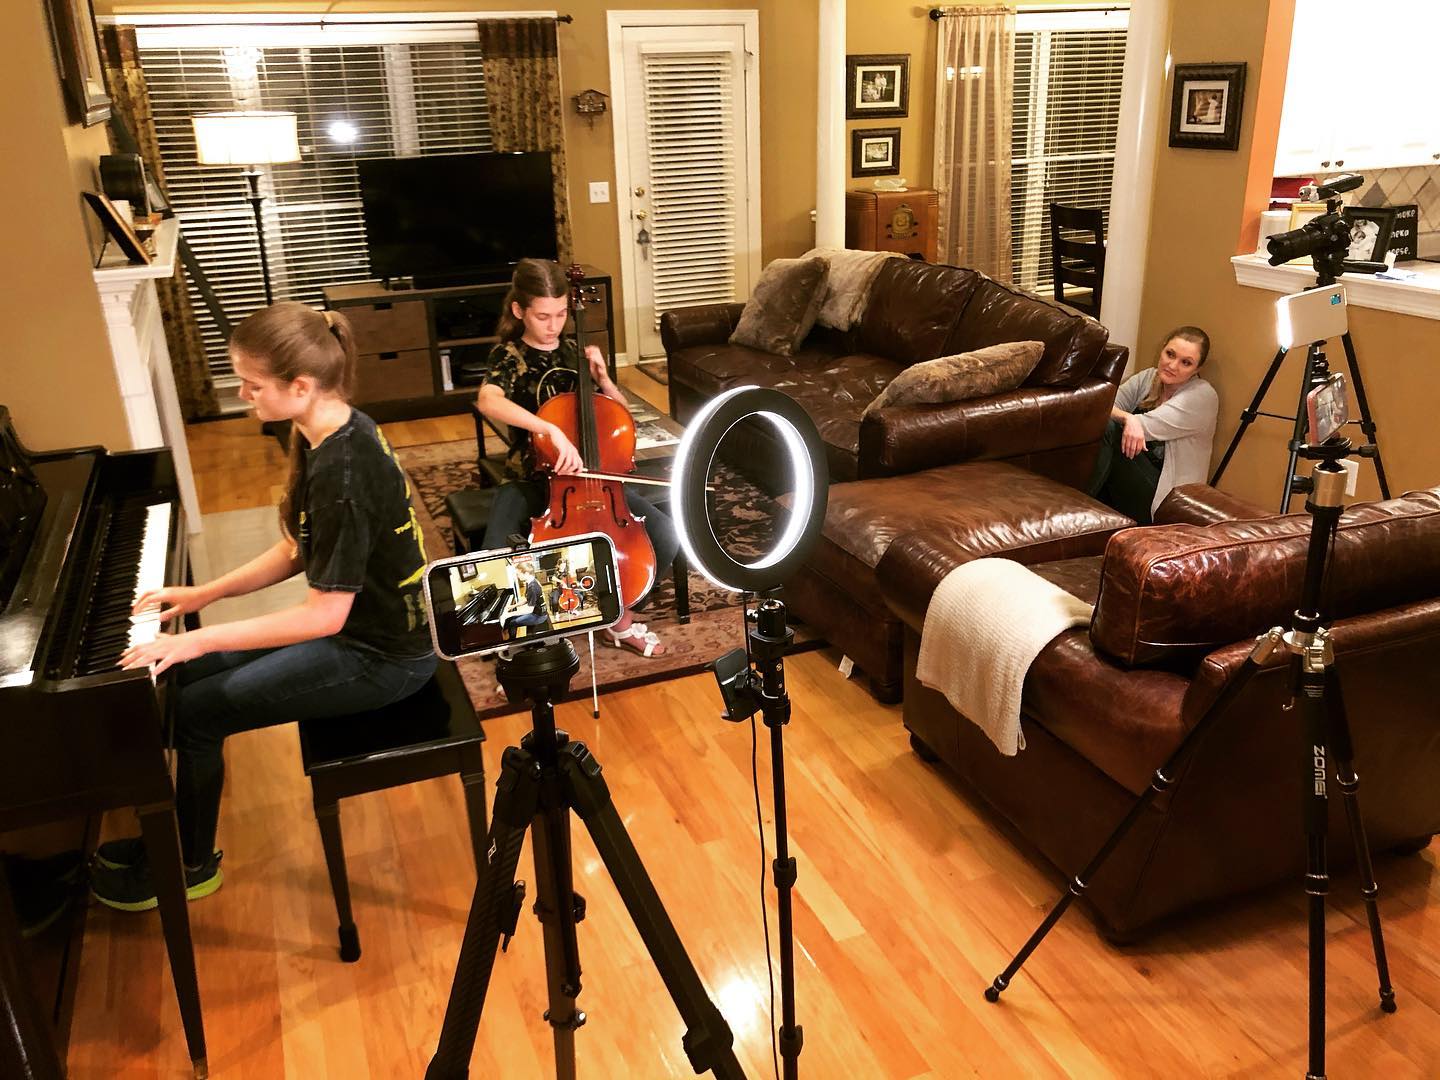 Behind the scenes at the latest music recording for Kate and Sara. I’m definitely biased, but this one is special and will debut Sunday on my YouTube channel (link in bio). #family #music #piano #cello